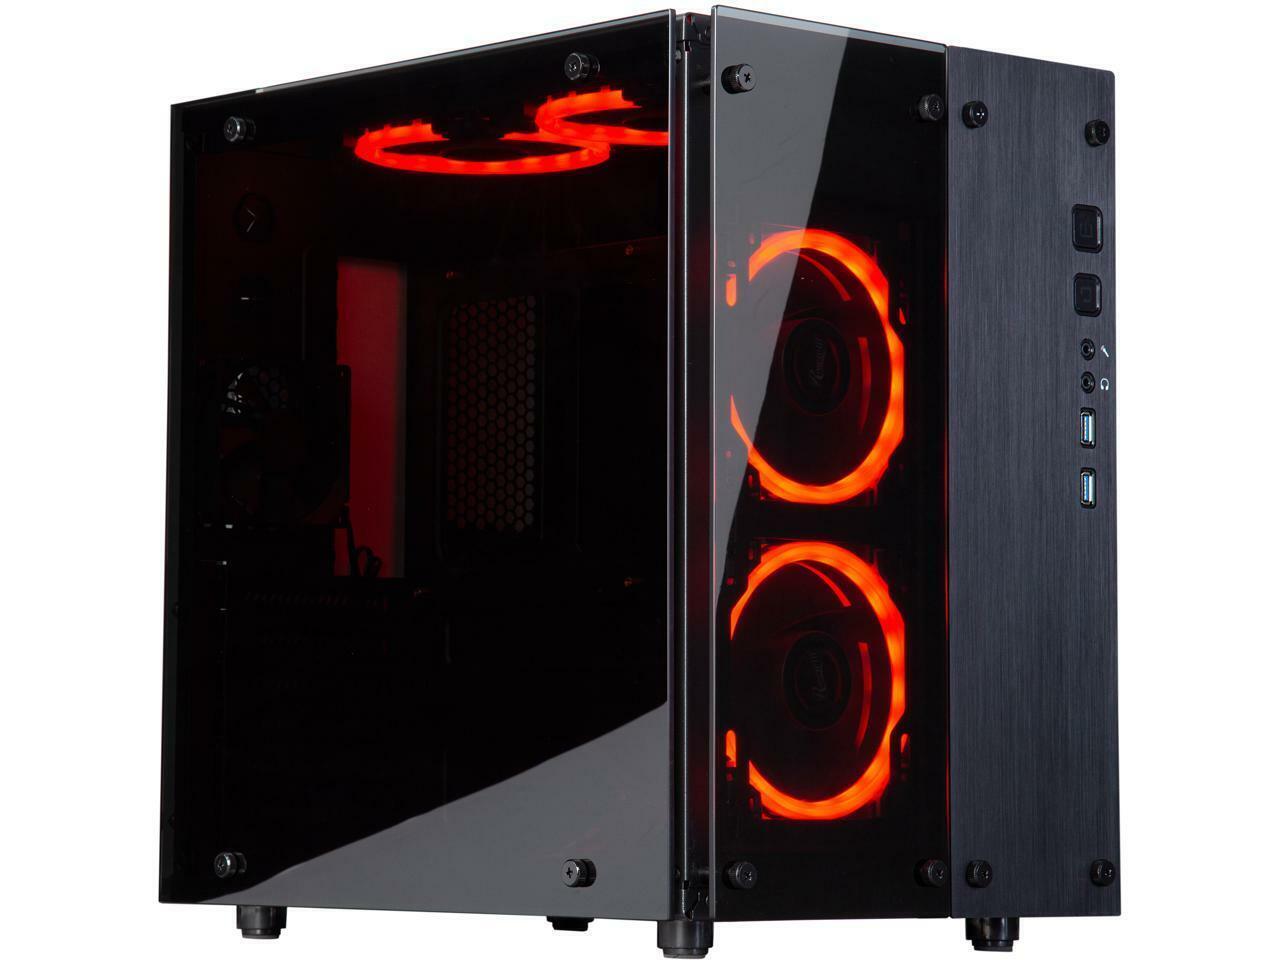 Rosewill CULLINAN PX RGB ATX Mid Tower Gaming PC Computer Case Supports 240